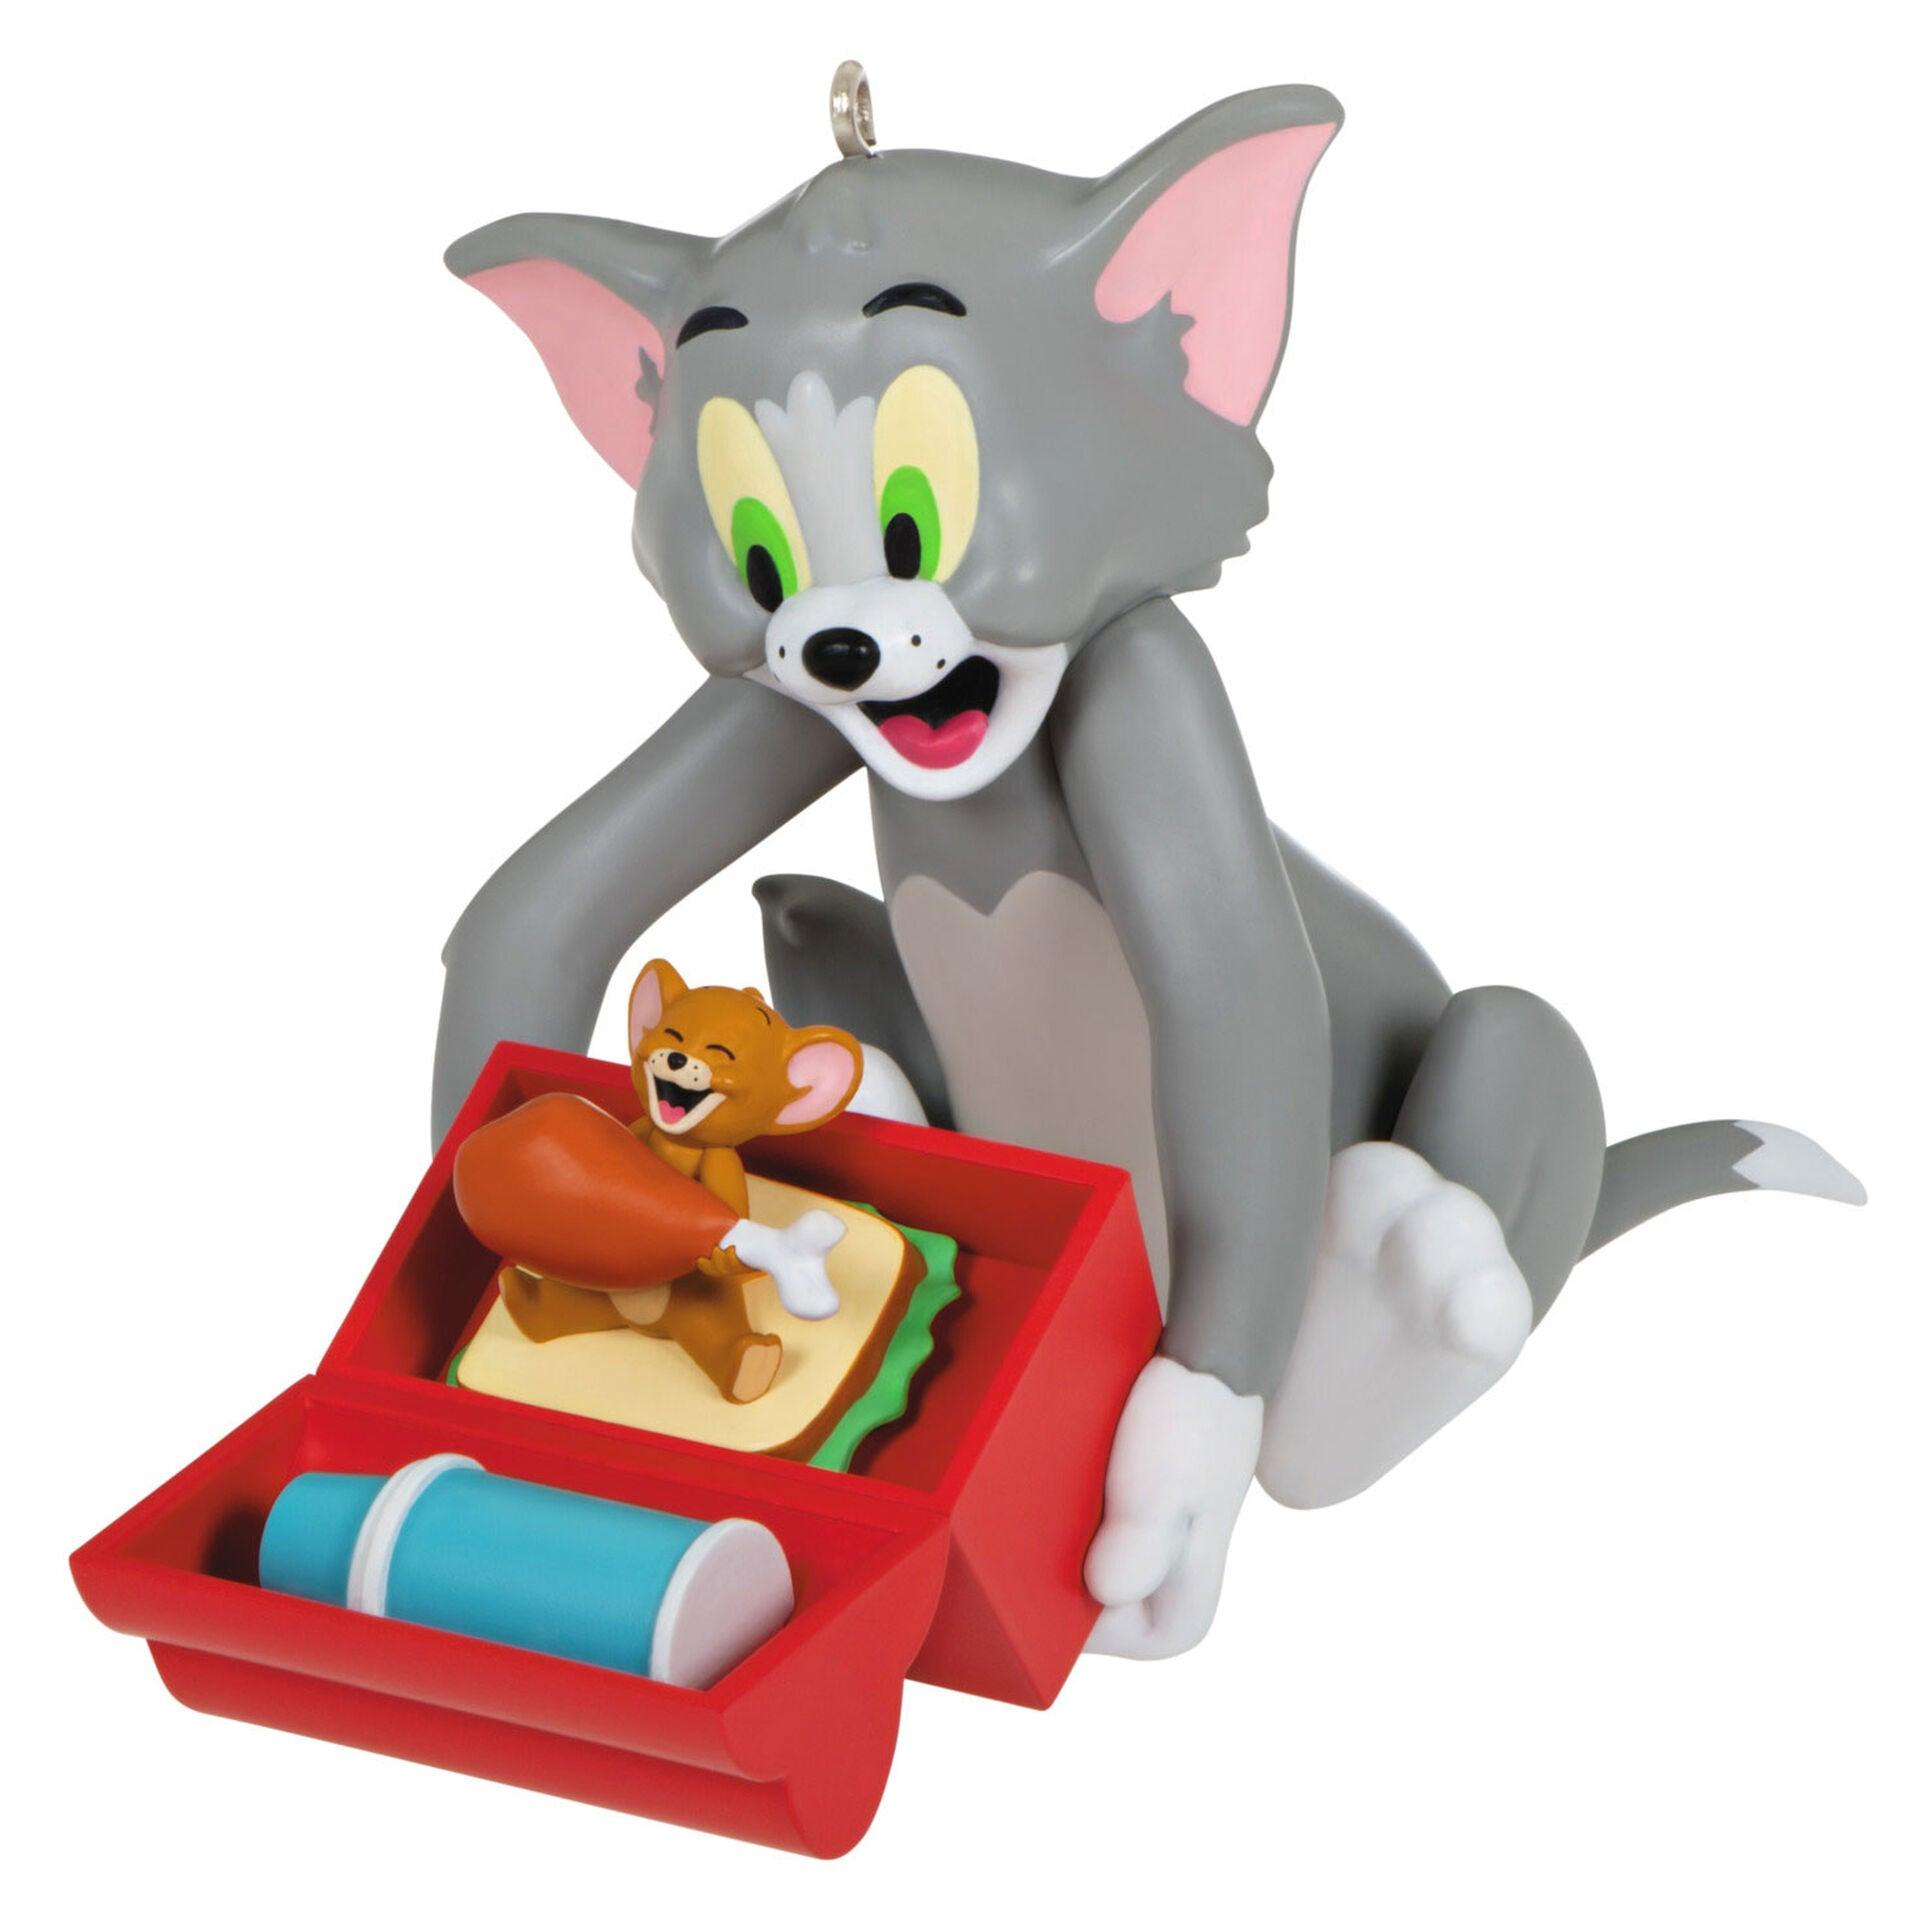 Tom and Jerry™ What's for Lunch? Ornament